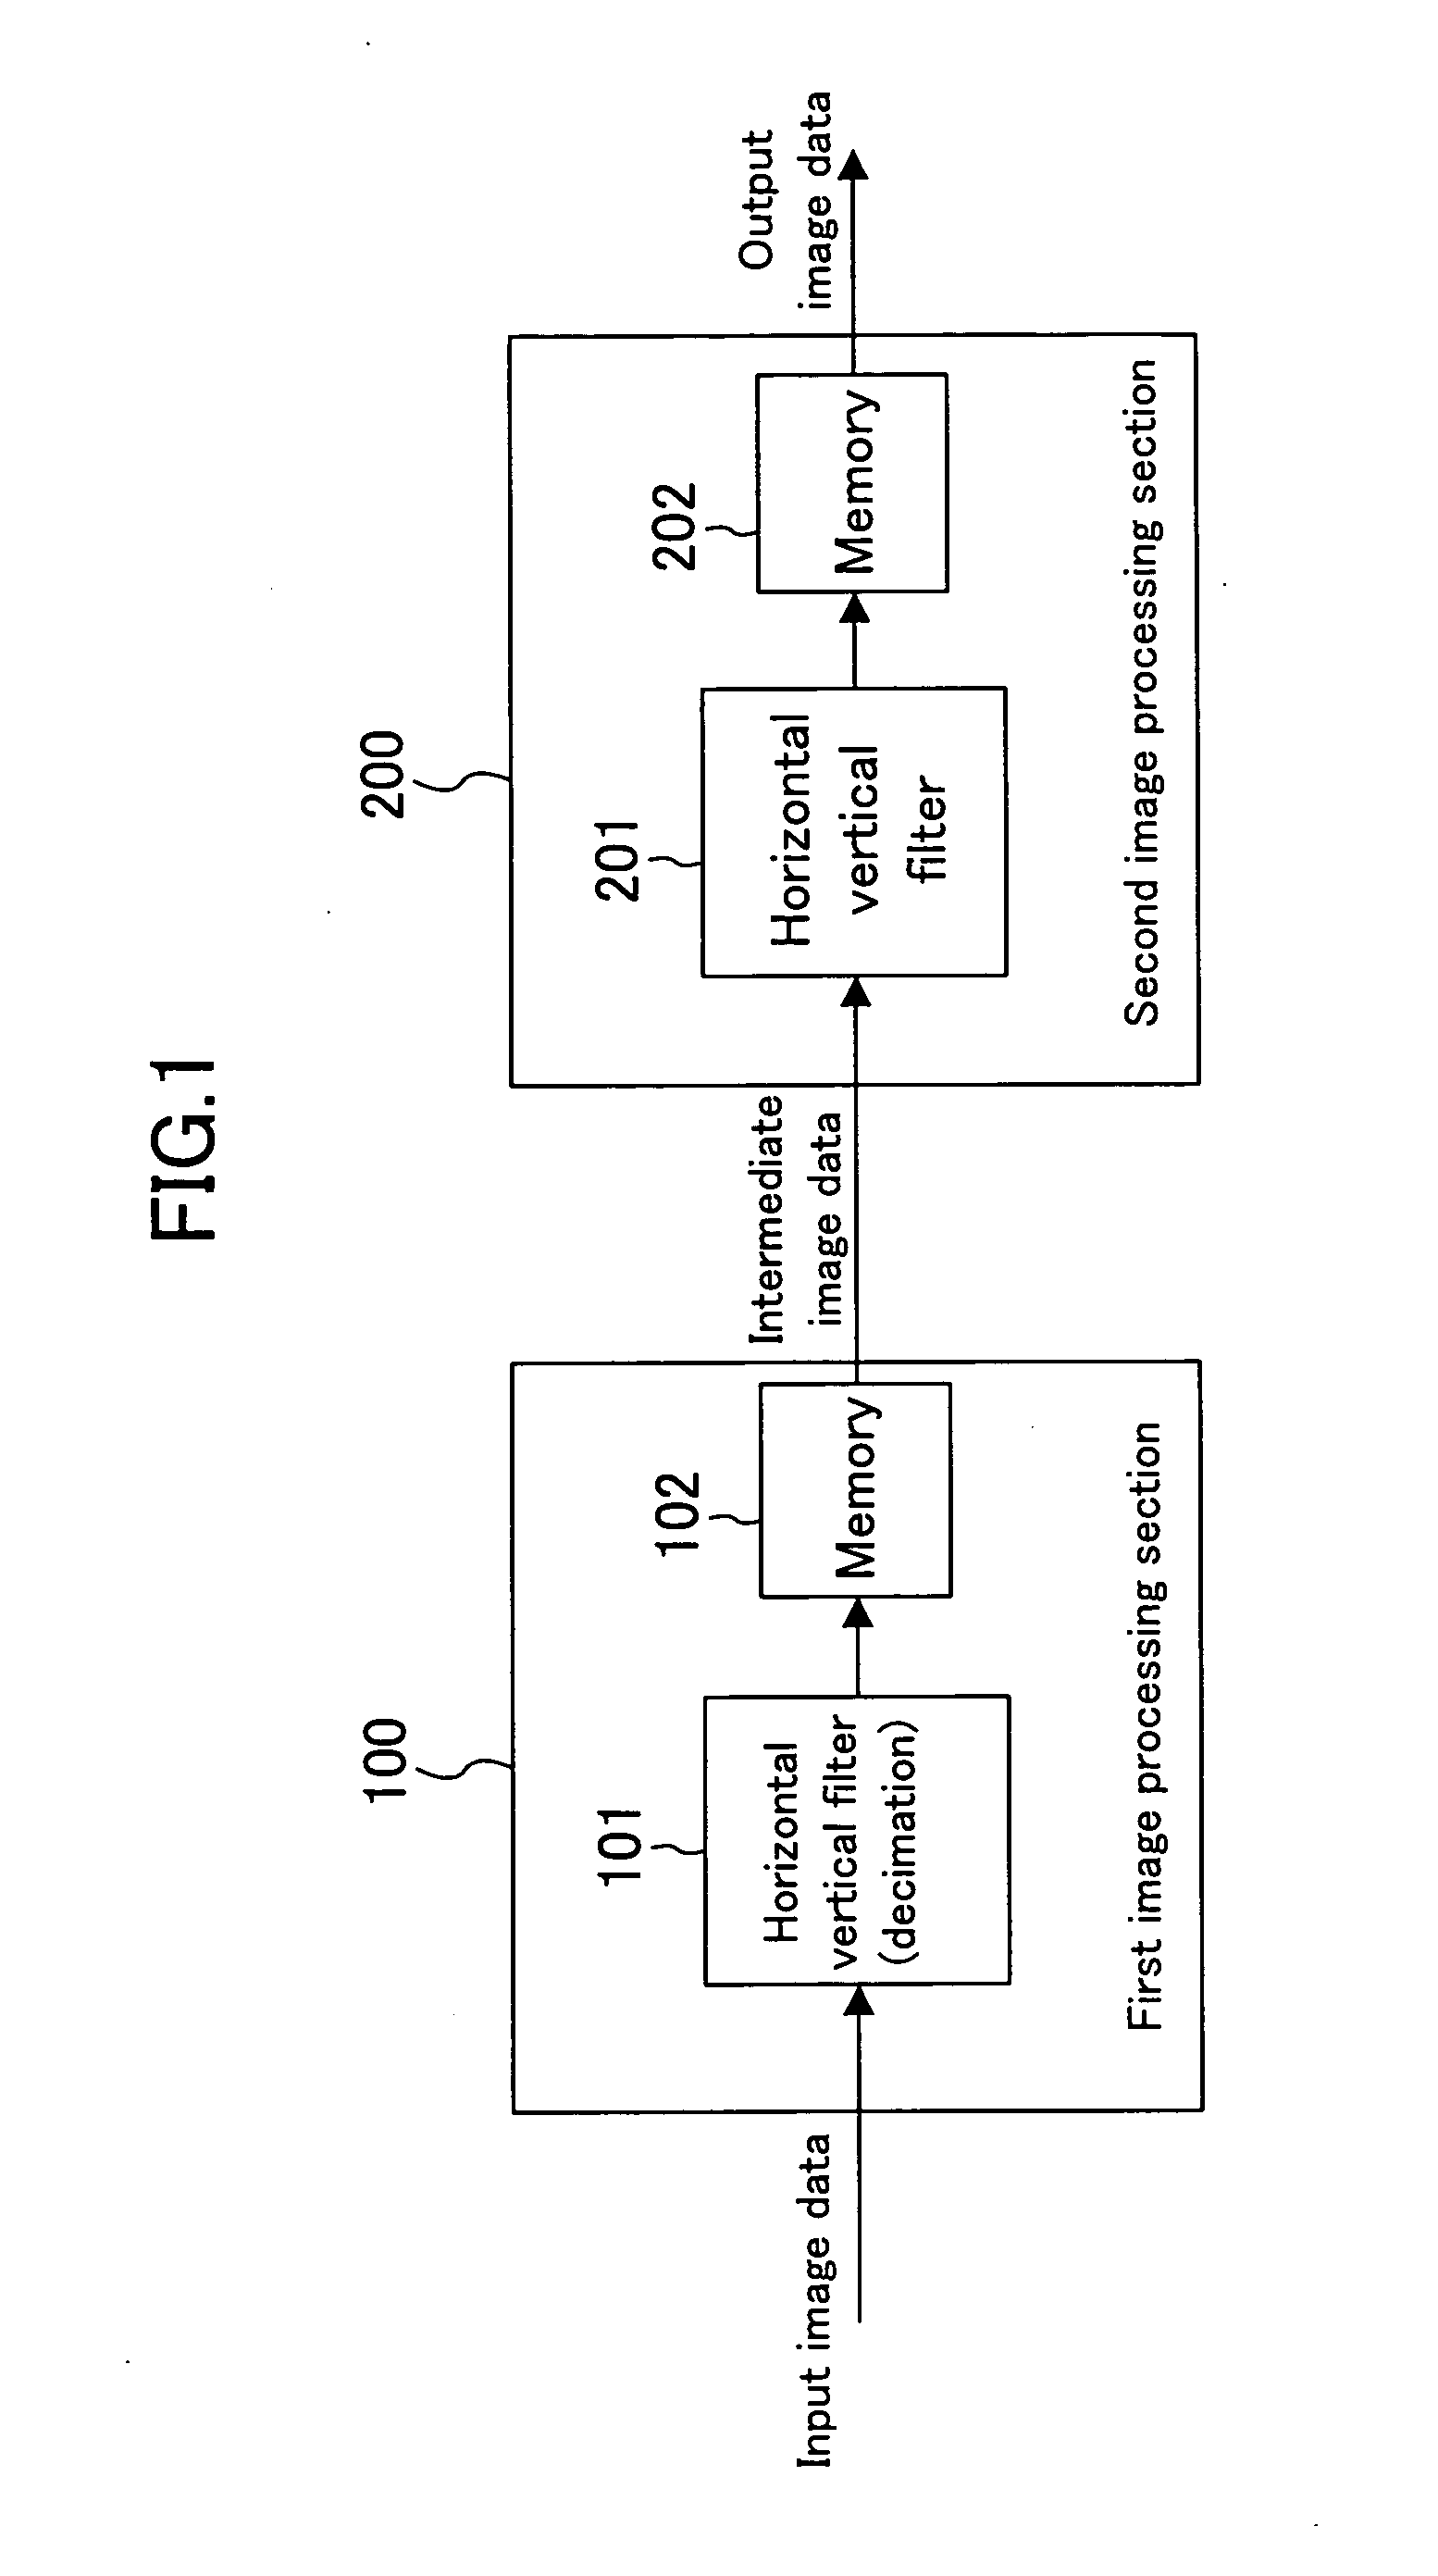 Image data processing device